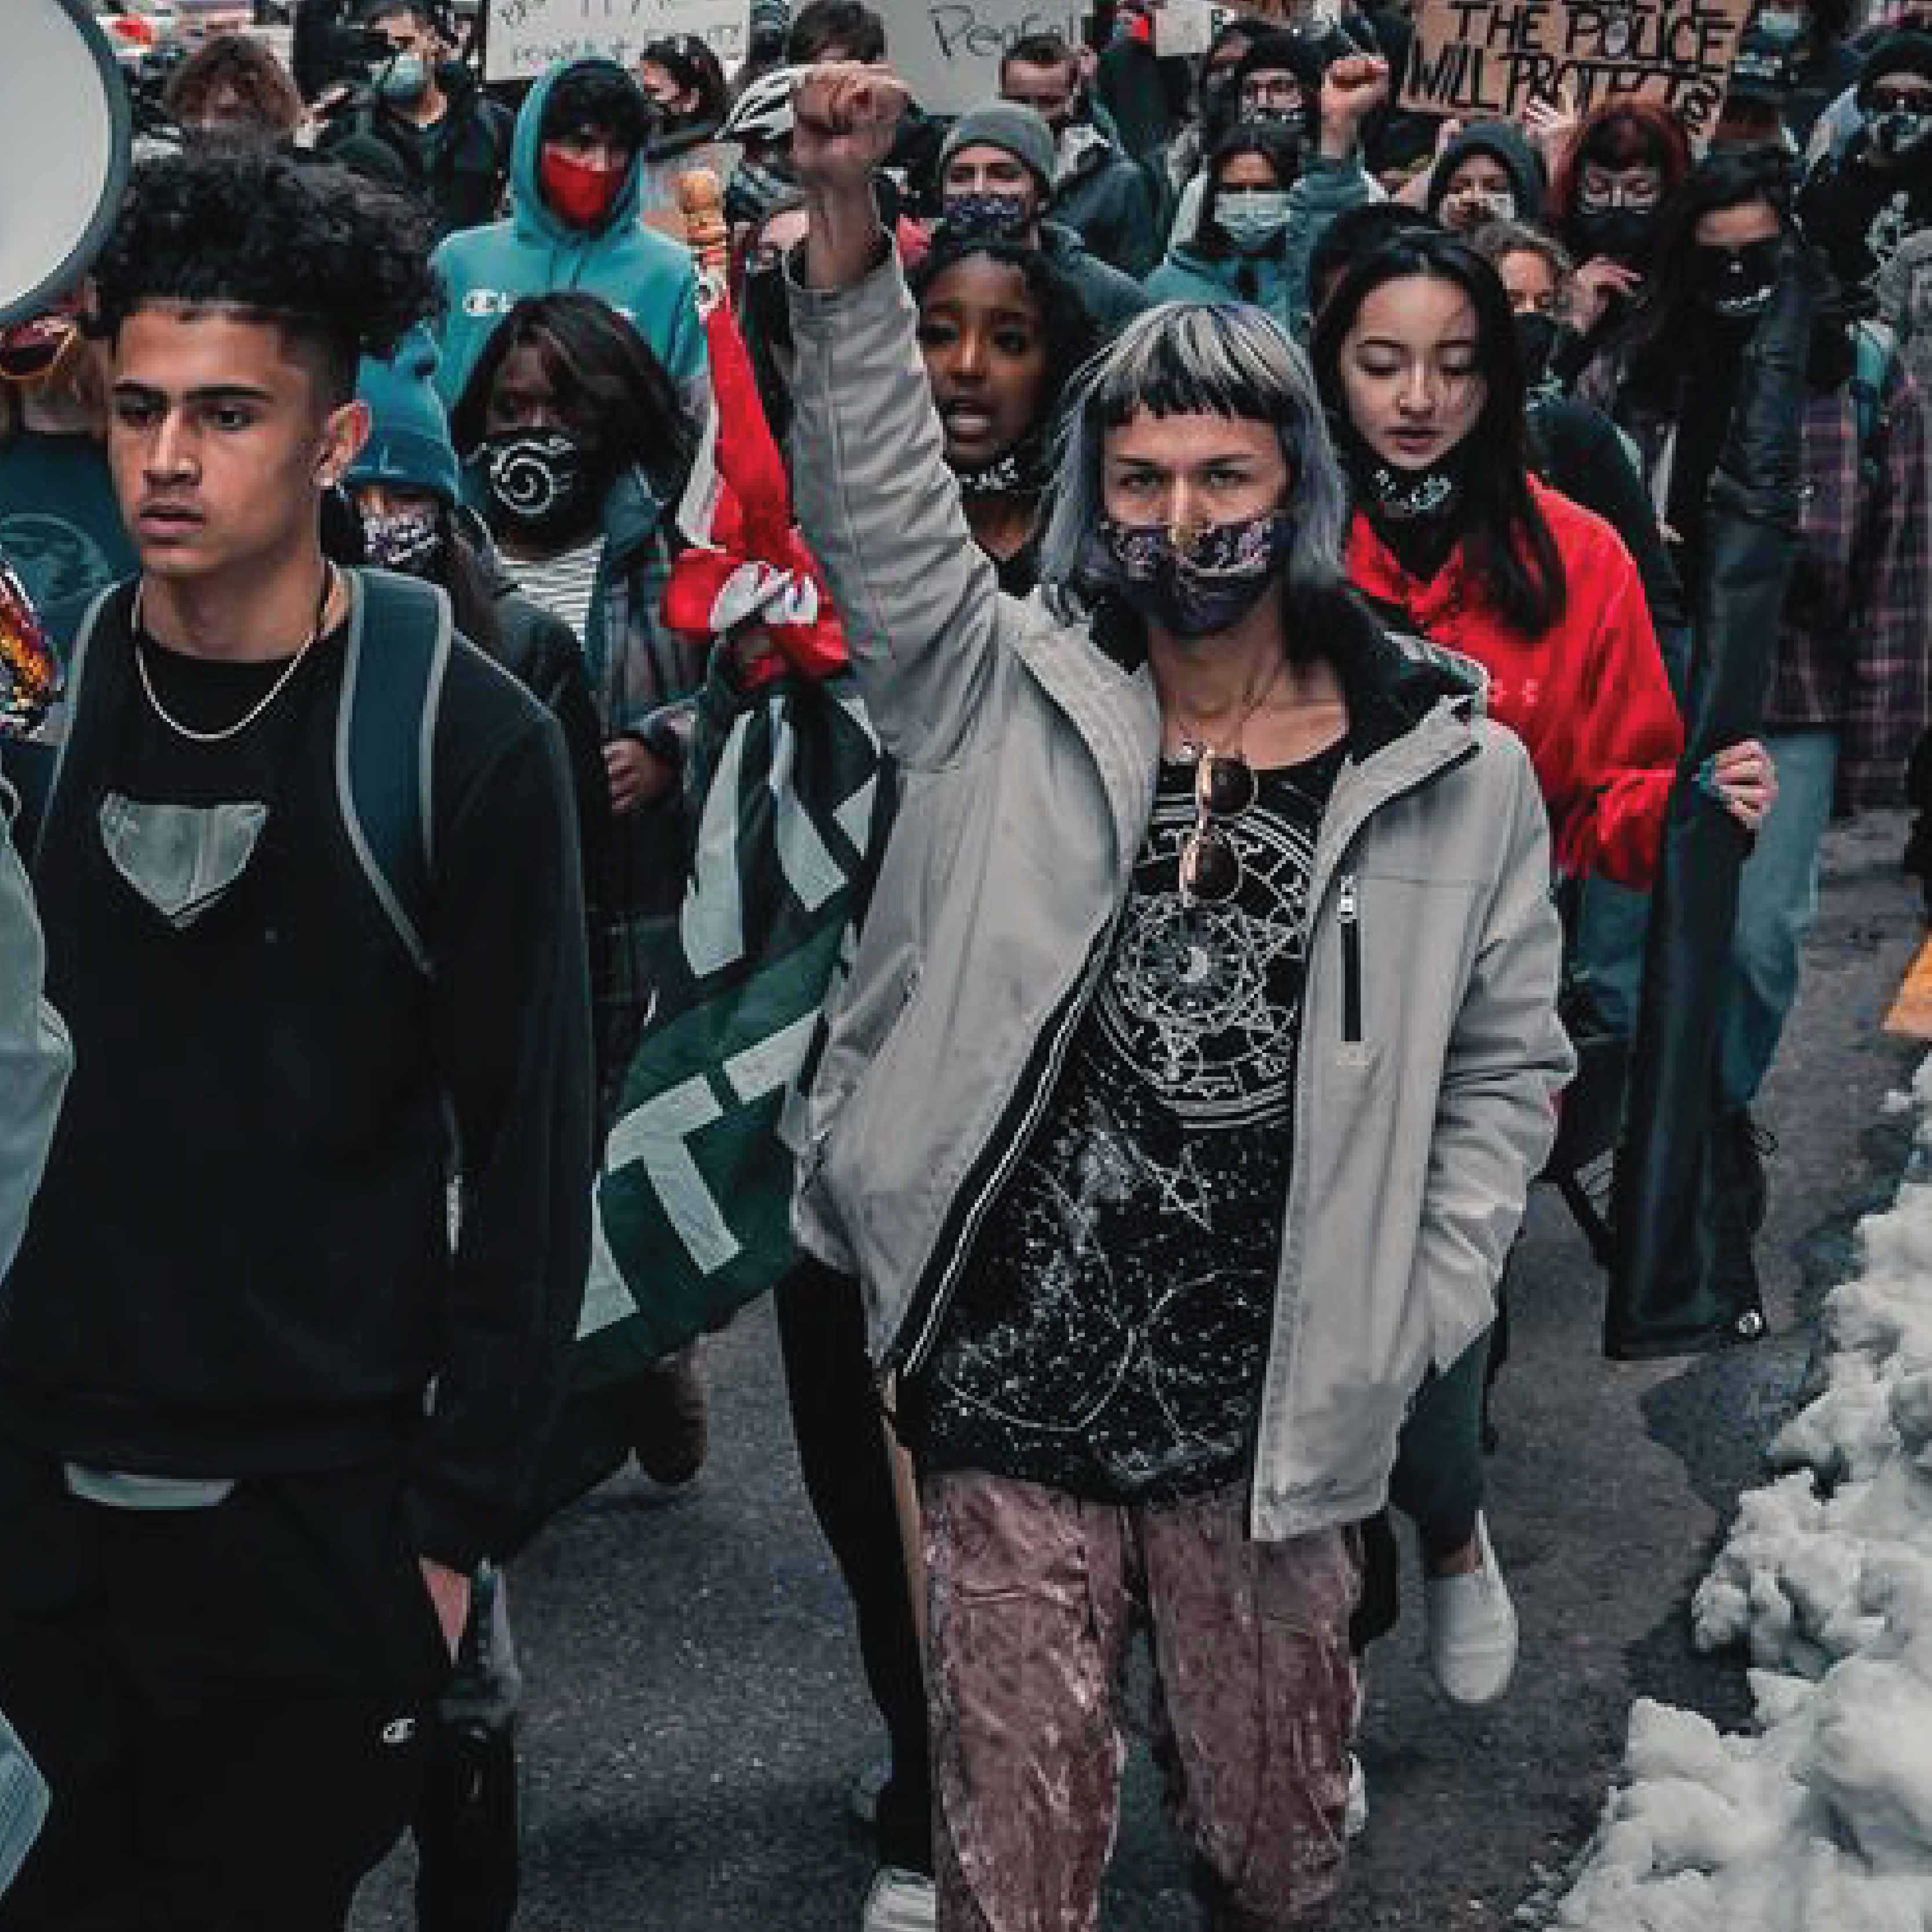 An anti-racism protest takes place in Colorado, USA. (file)